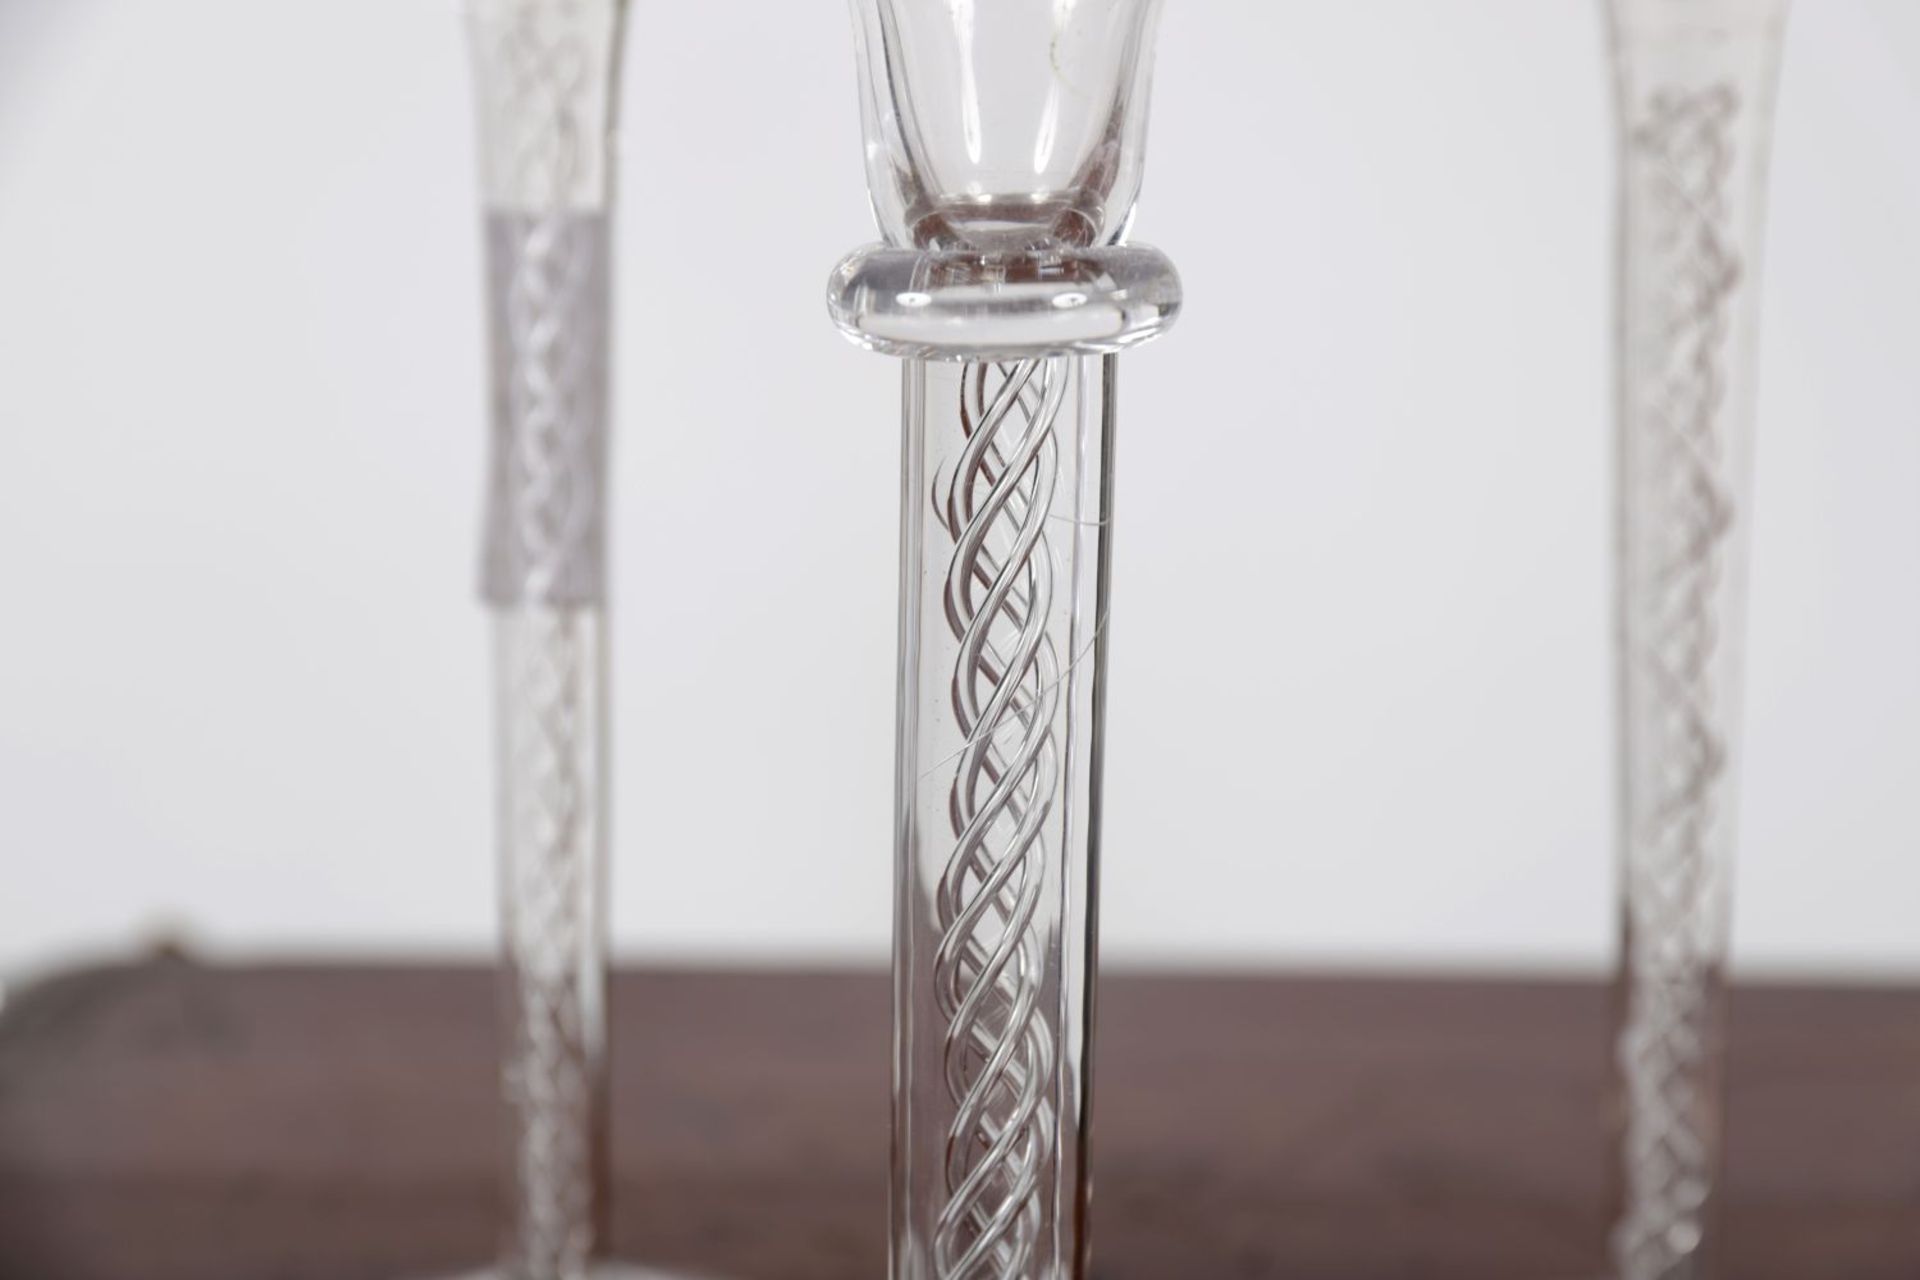 GROUP OF 5 LIQUEUR GLASSES - Image 2 of 2